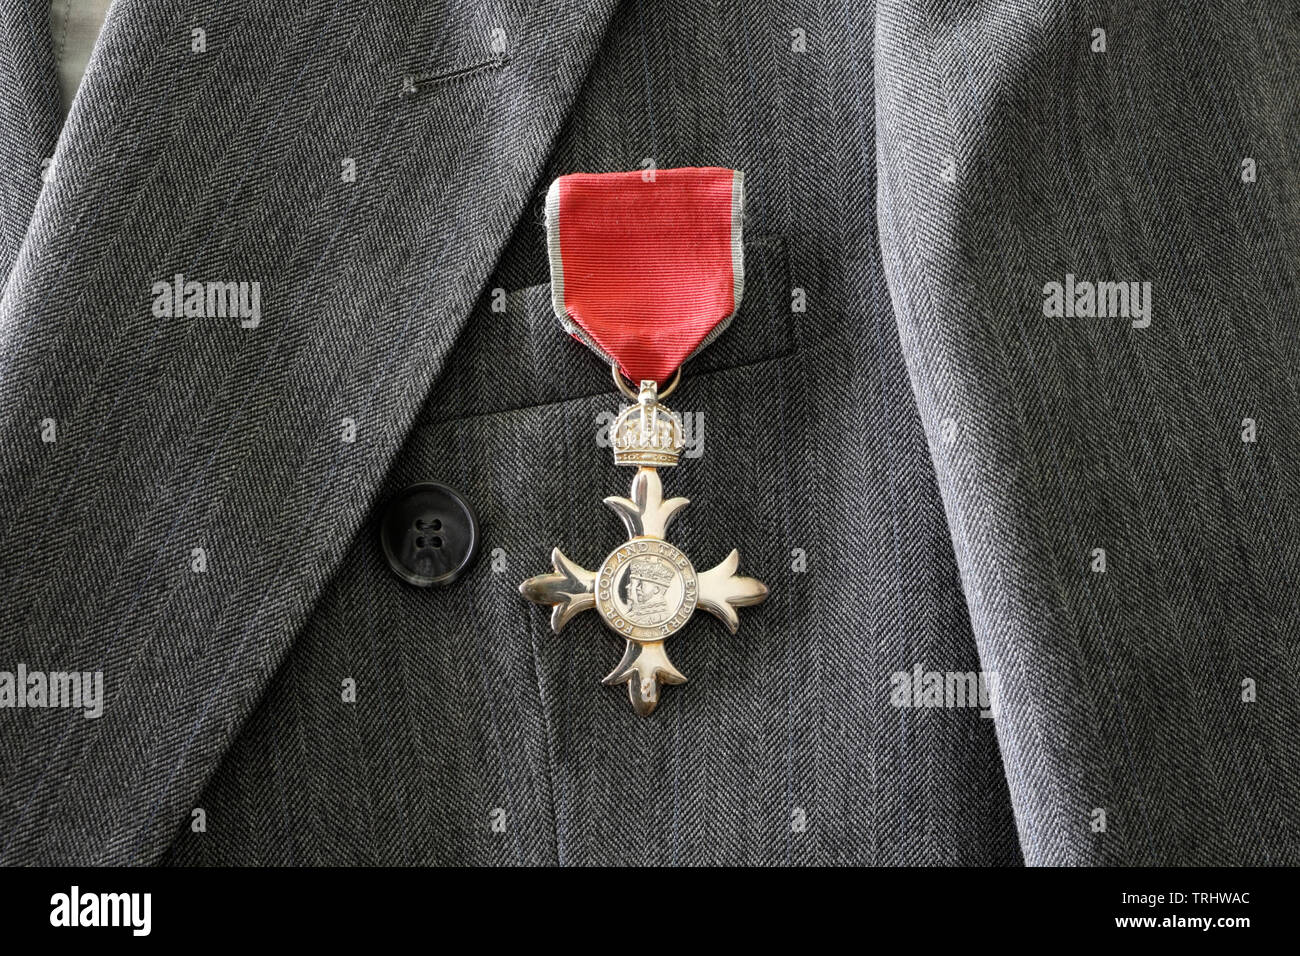 British MBE medal worn on grey suit, Member of the British Empire award life event honours system Stock Photo